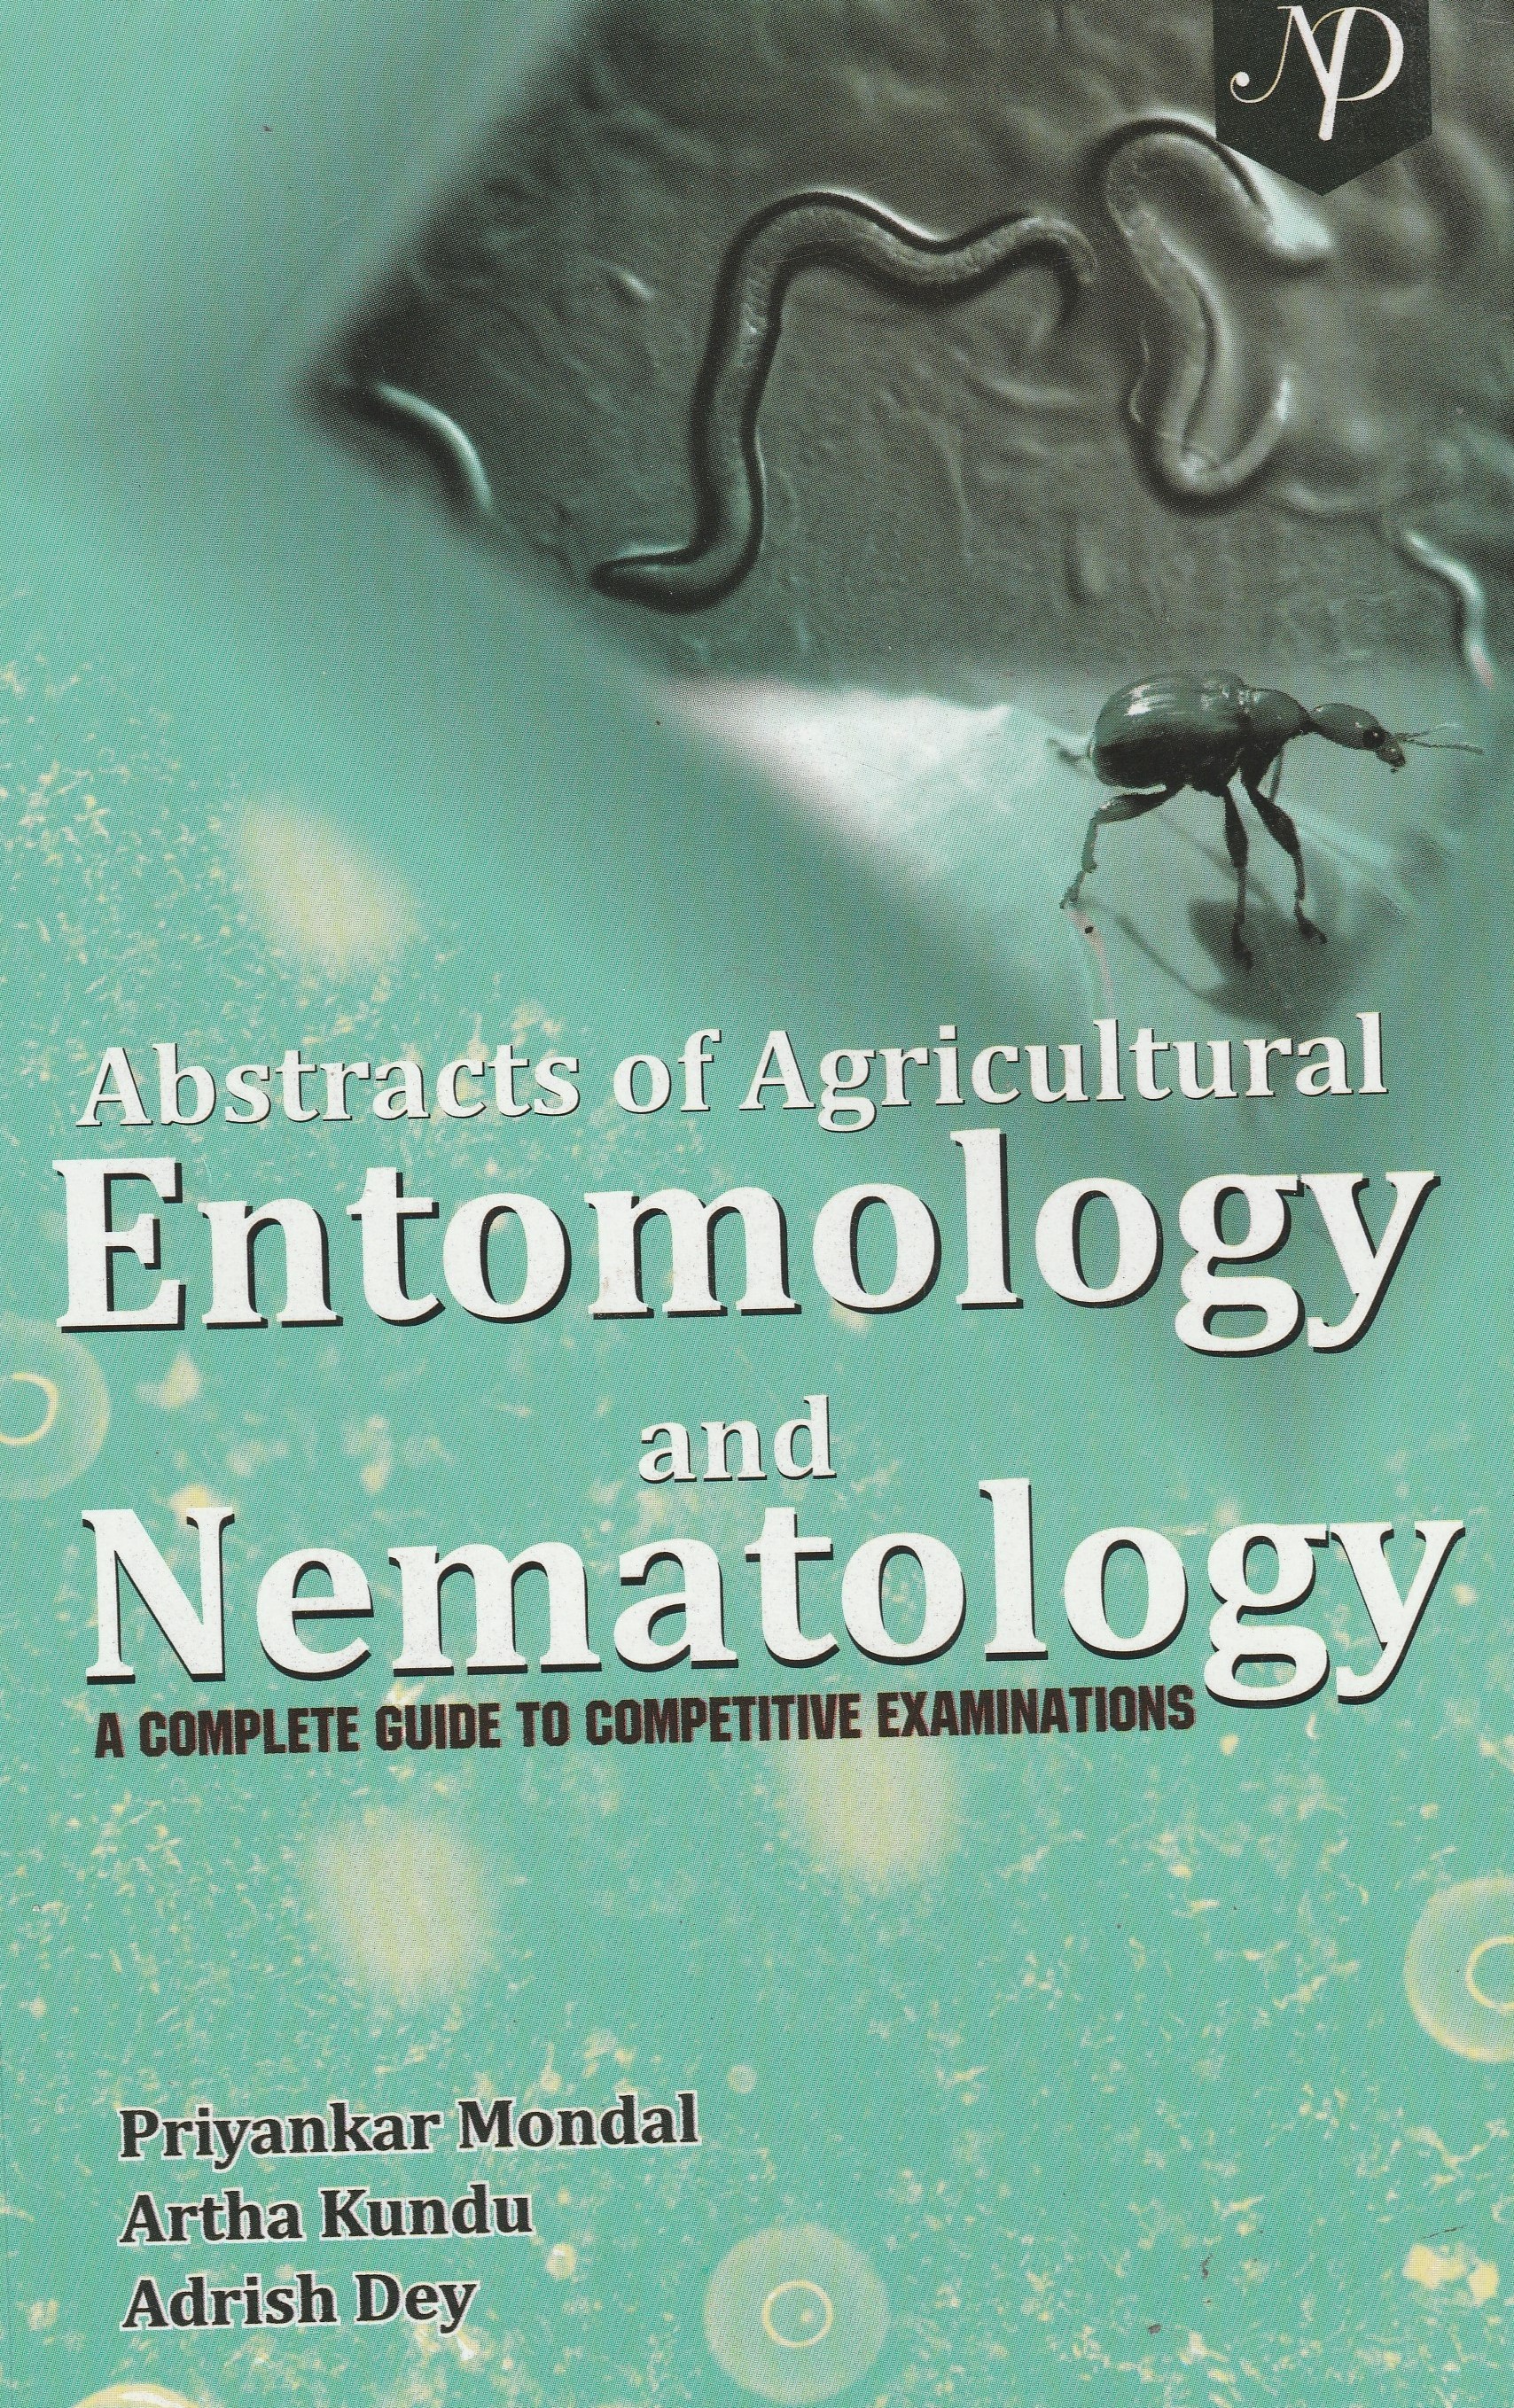 Abstracts of Agricultural Entomology and Nematology